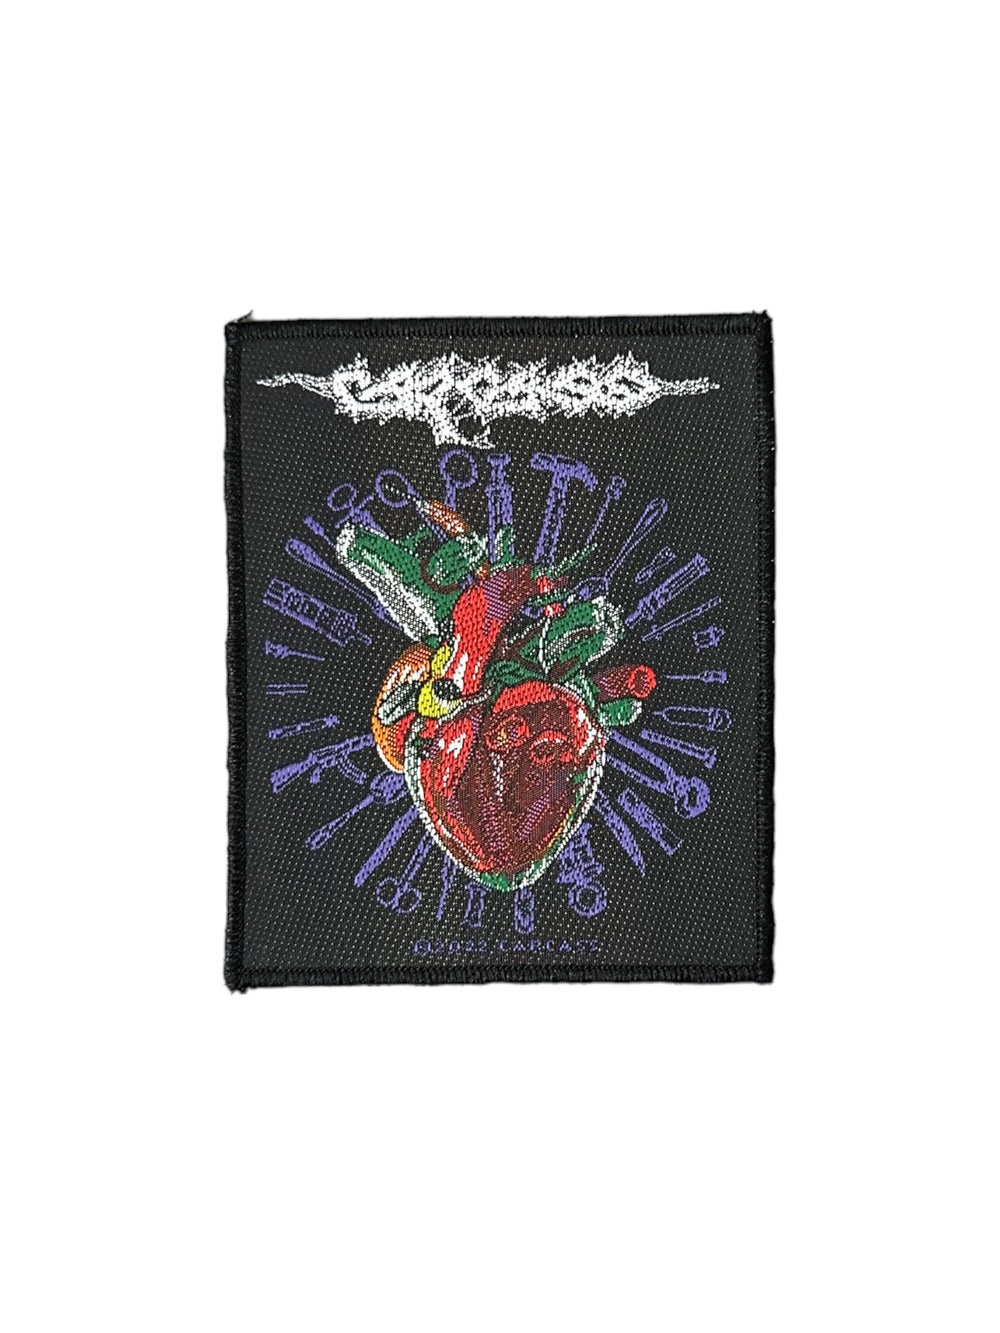 Carcass Rotten To The Gore Official Woven Patch Brand New